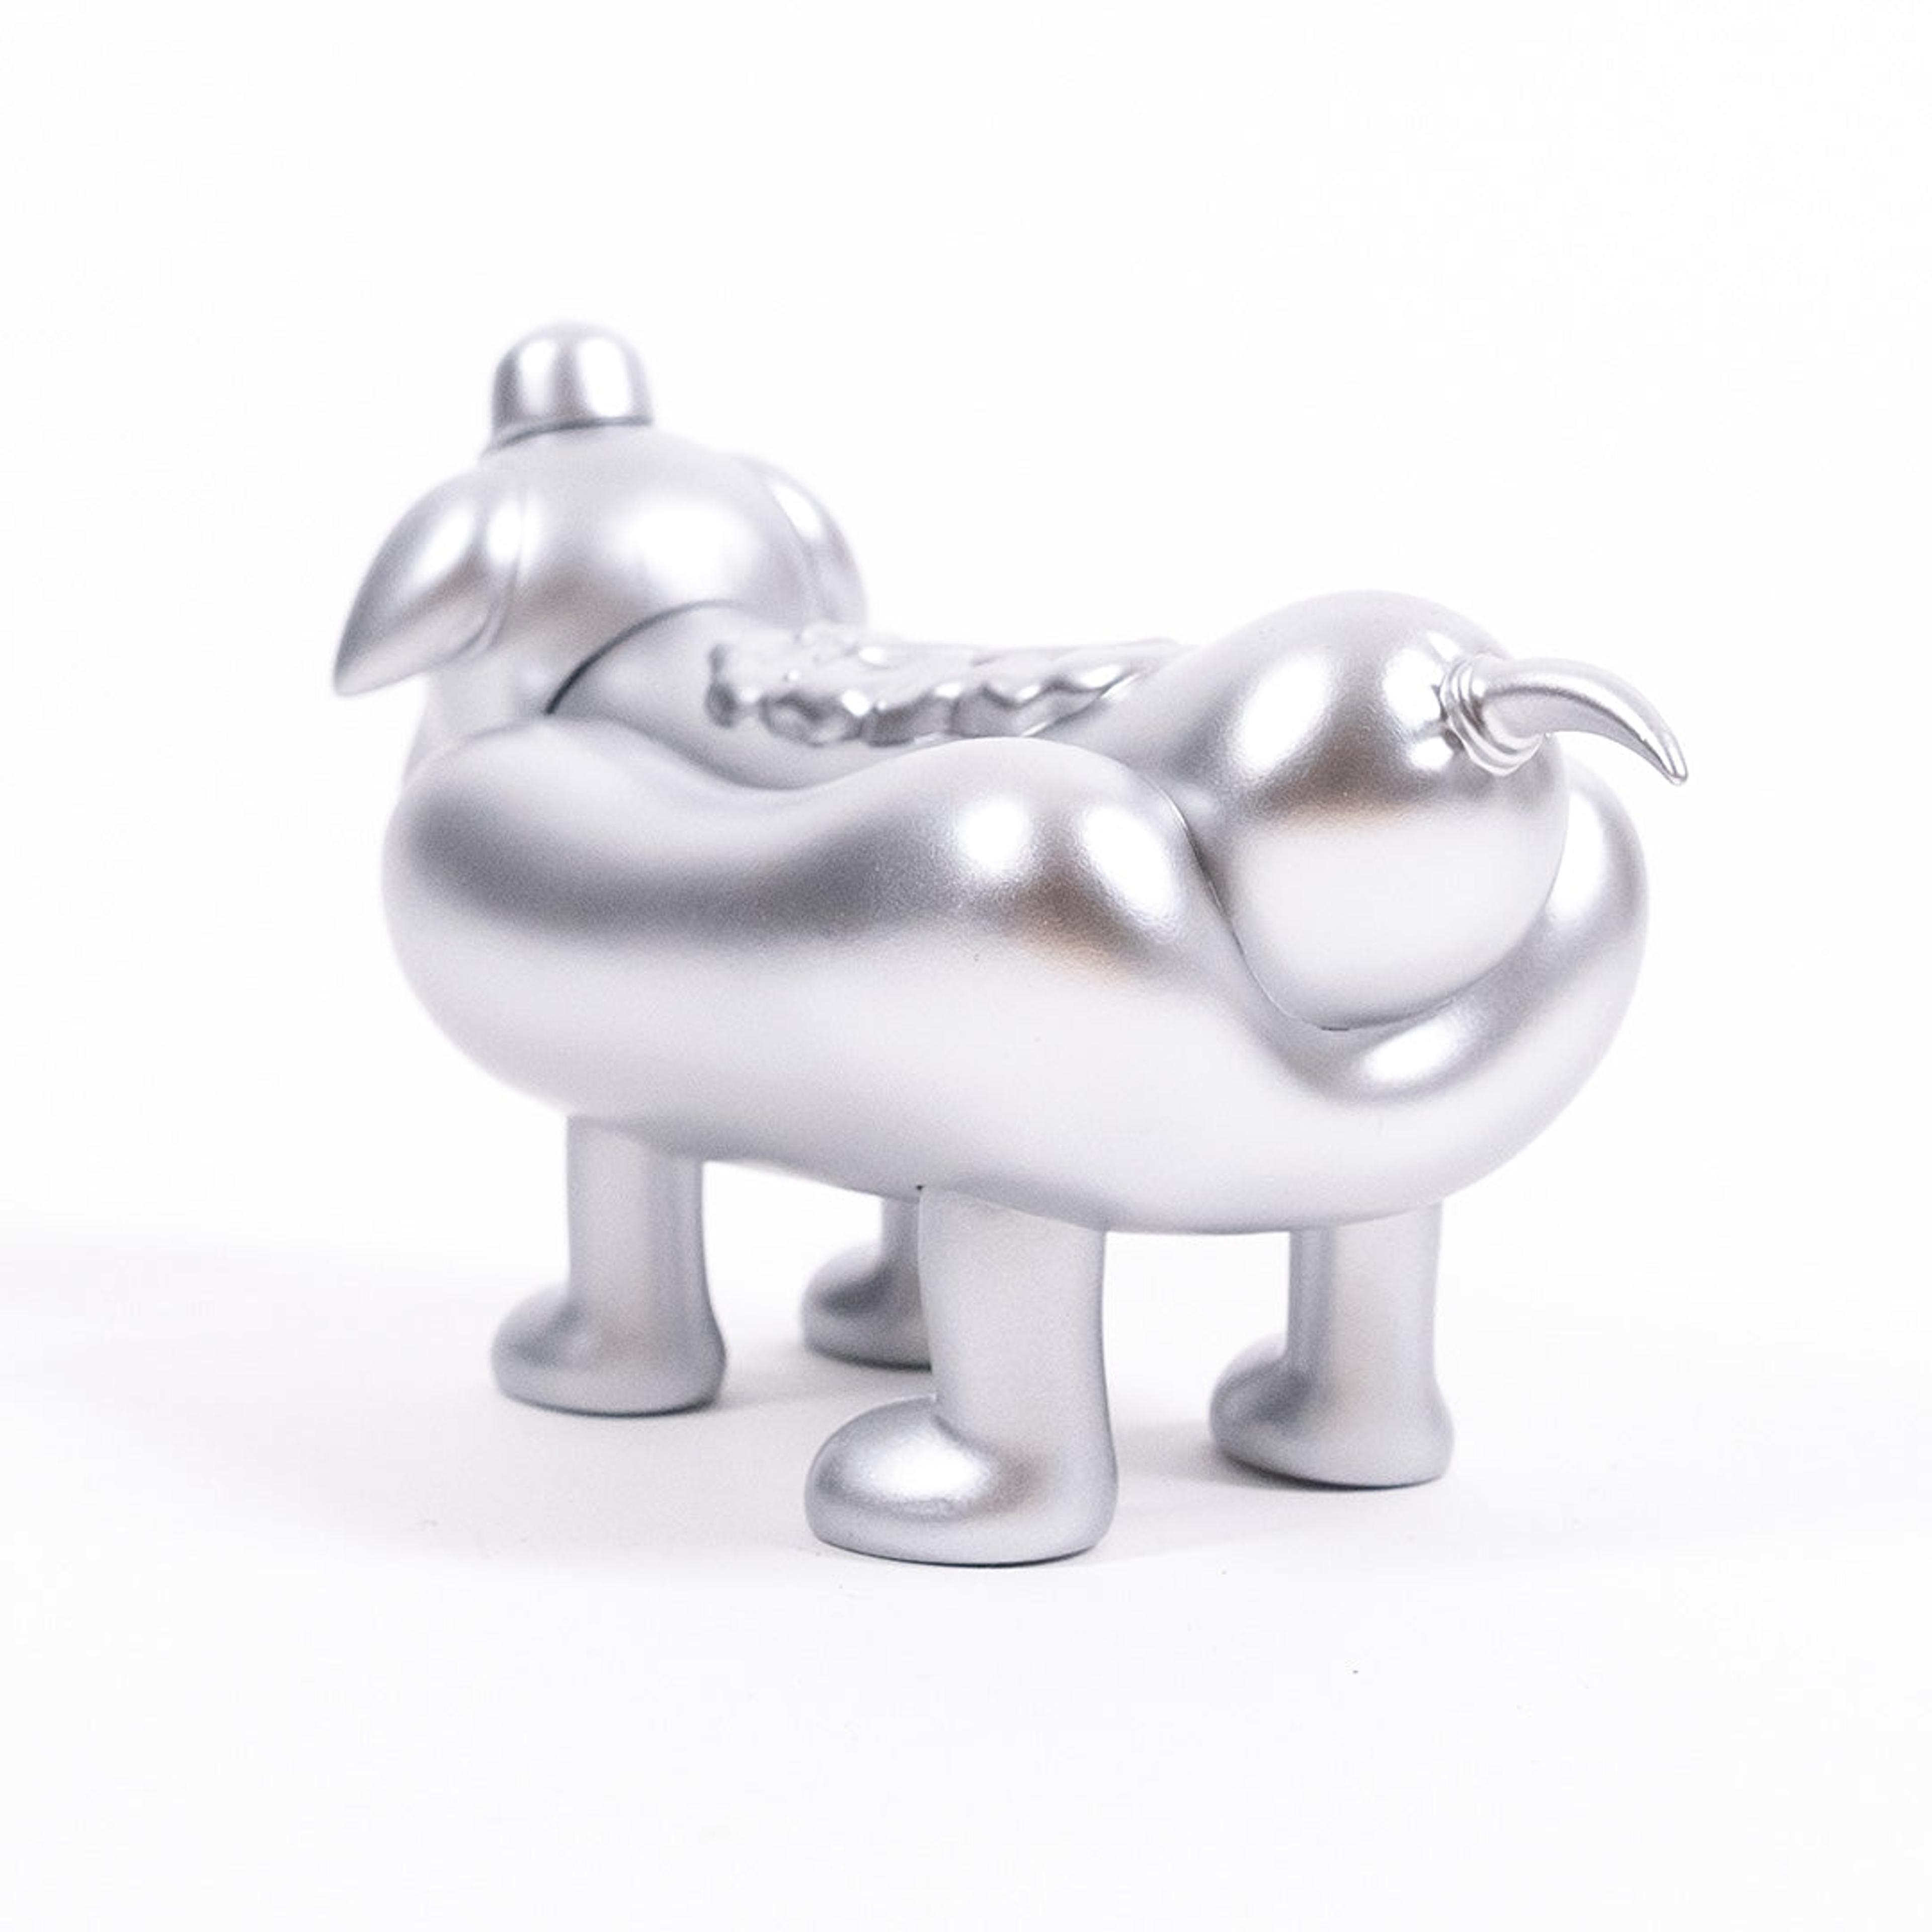 Alternate View 6 of Sheefy Coney Dog Sculpture - Silver